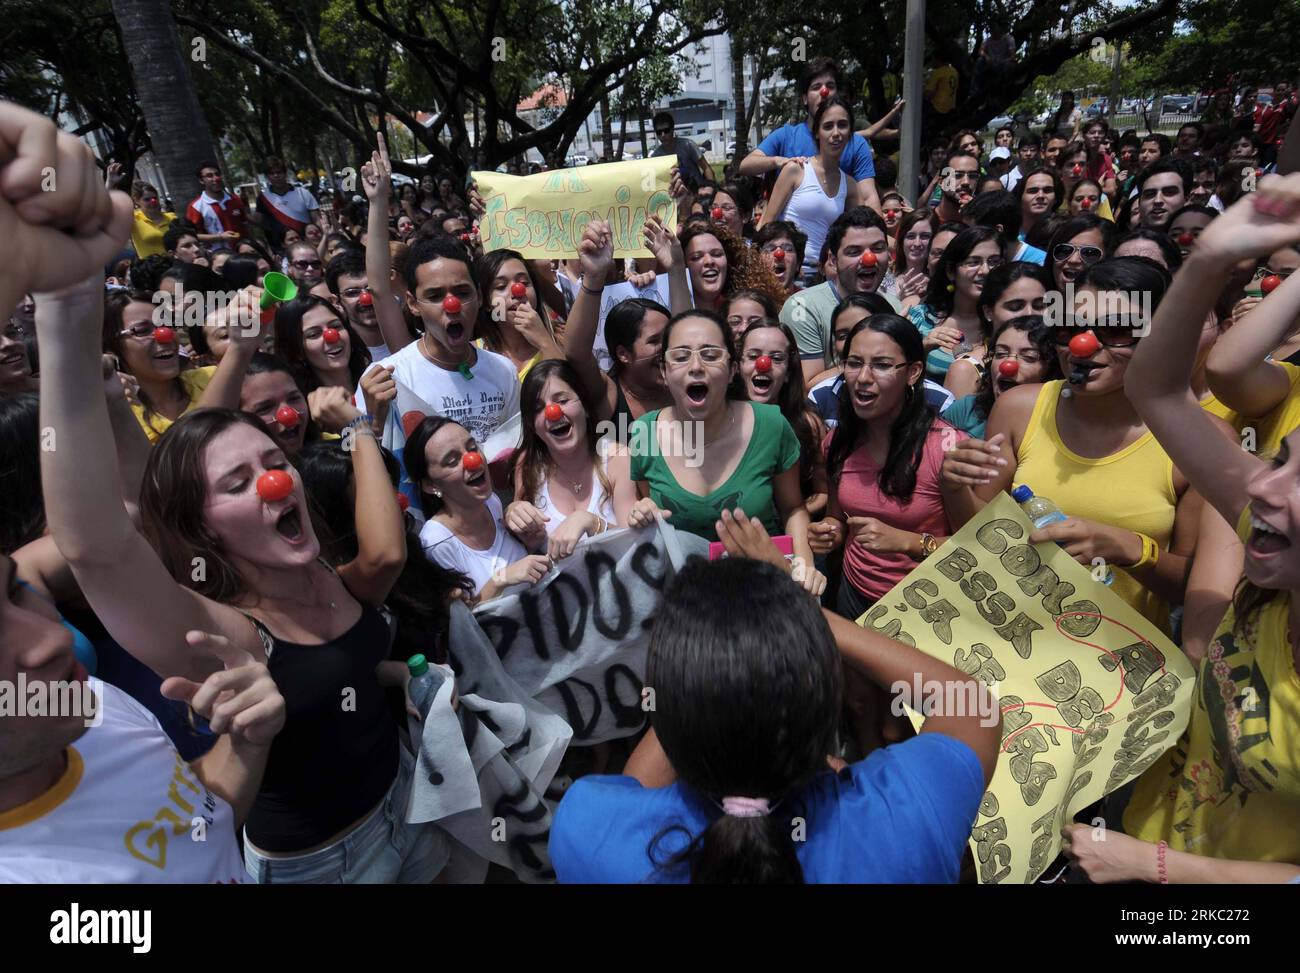 Bildnummer: 54645927  Datum: 16.11.2010  Copyright: imago/Xinhua (101117) -- Sao Paulo, Nov. 17, 2010 (Xinhua) -- Students wearing clown s noses and holding posters participate in a protest in Sao Paulo of Brazil, on Nov. 16, 2010. About 1,000 students protested against the latest round of High School National exams (ENEM) after exam results were annulled because of printing errors on the exam papers. (Xinhua/Agencia Estado) (BRAZIL OUT) (wh) BRAZIL-EDUCATION-PROTEST PUBLICATIONxNOTxINxCHN Gesellschaft Politik Studenten Studentendemo Demo Protest Bildung Uni kbdig xub 2010 quer o0 Menschenmeng Stock Photo